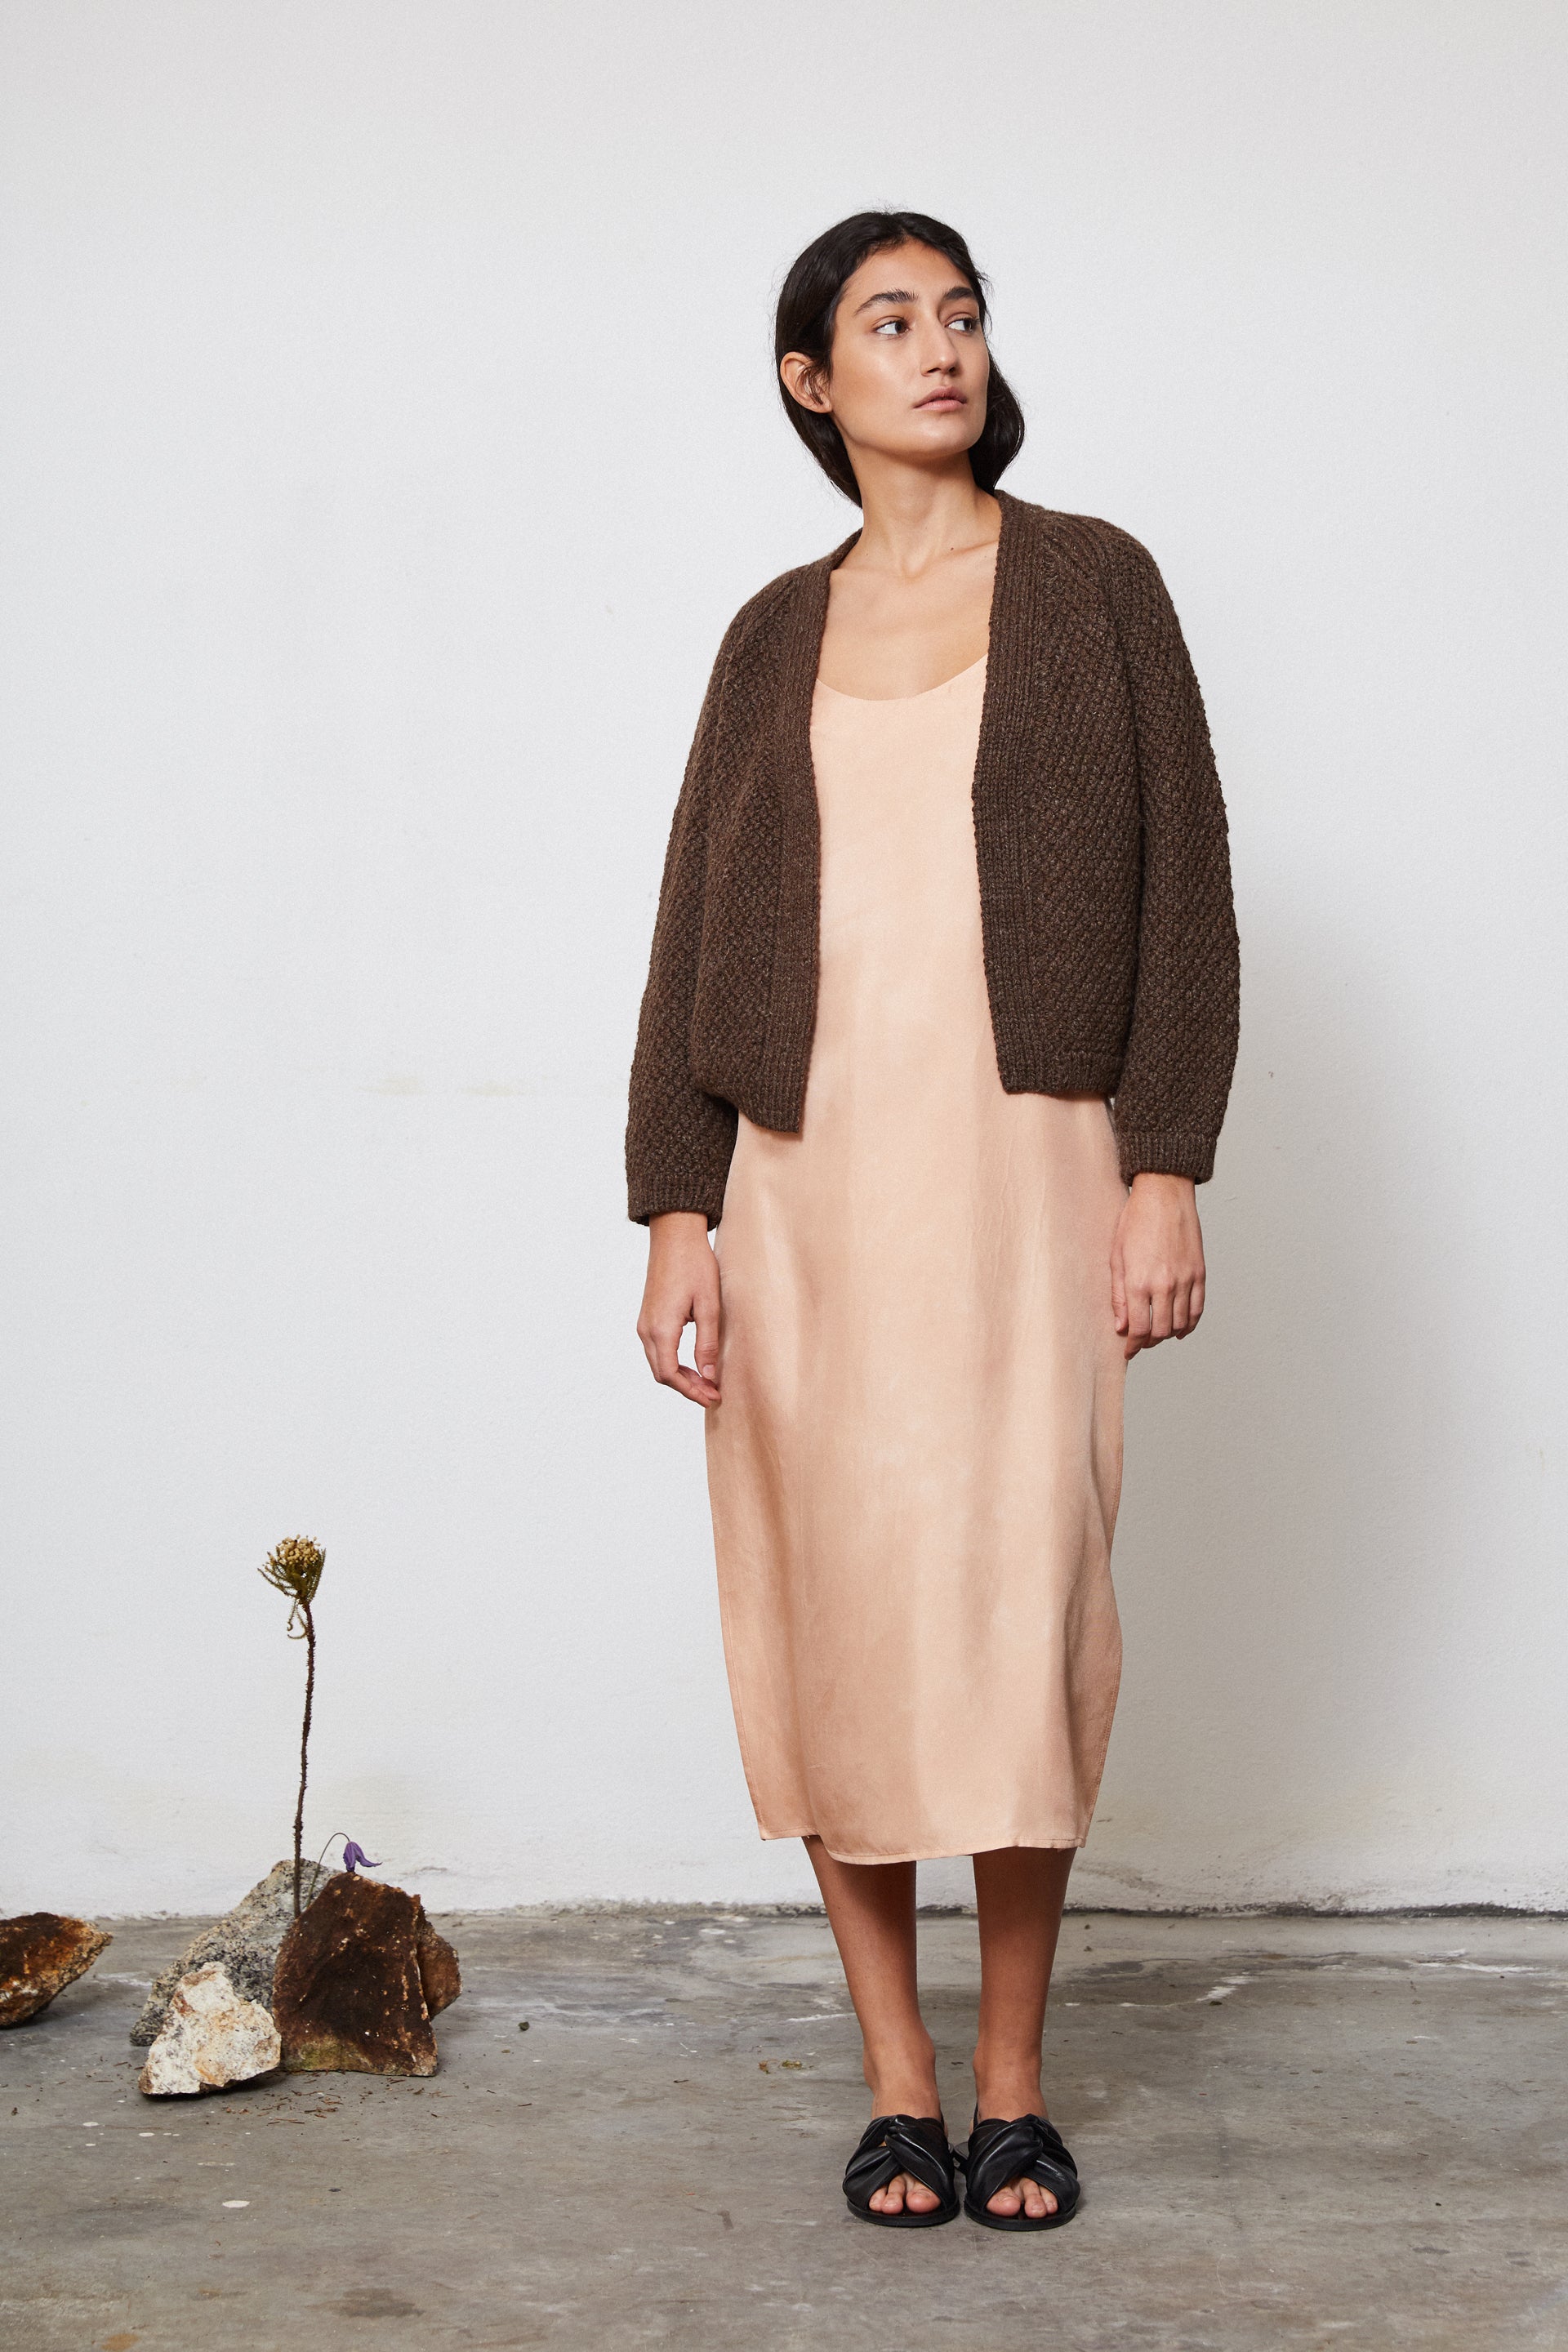 UNDYED, WOOL, HAND-KNITTED, CARDIGAN, STYLISH, SUSTAINABLE, HAND-CRAFTED, WOMENSWEAR 